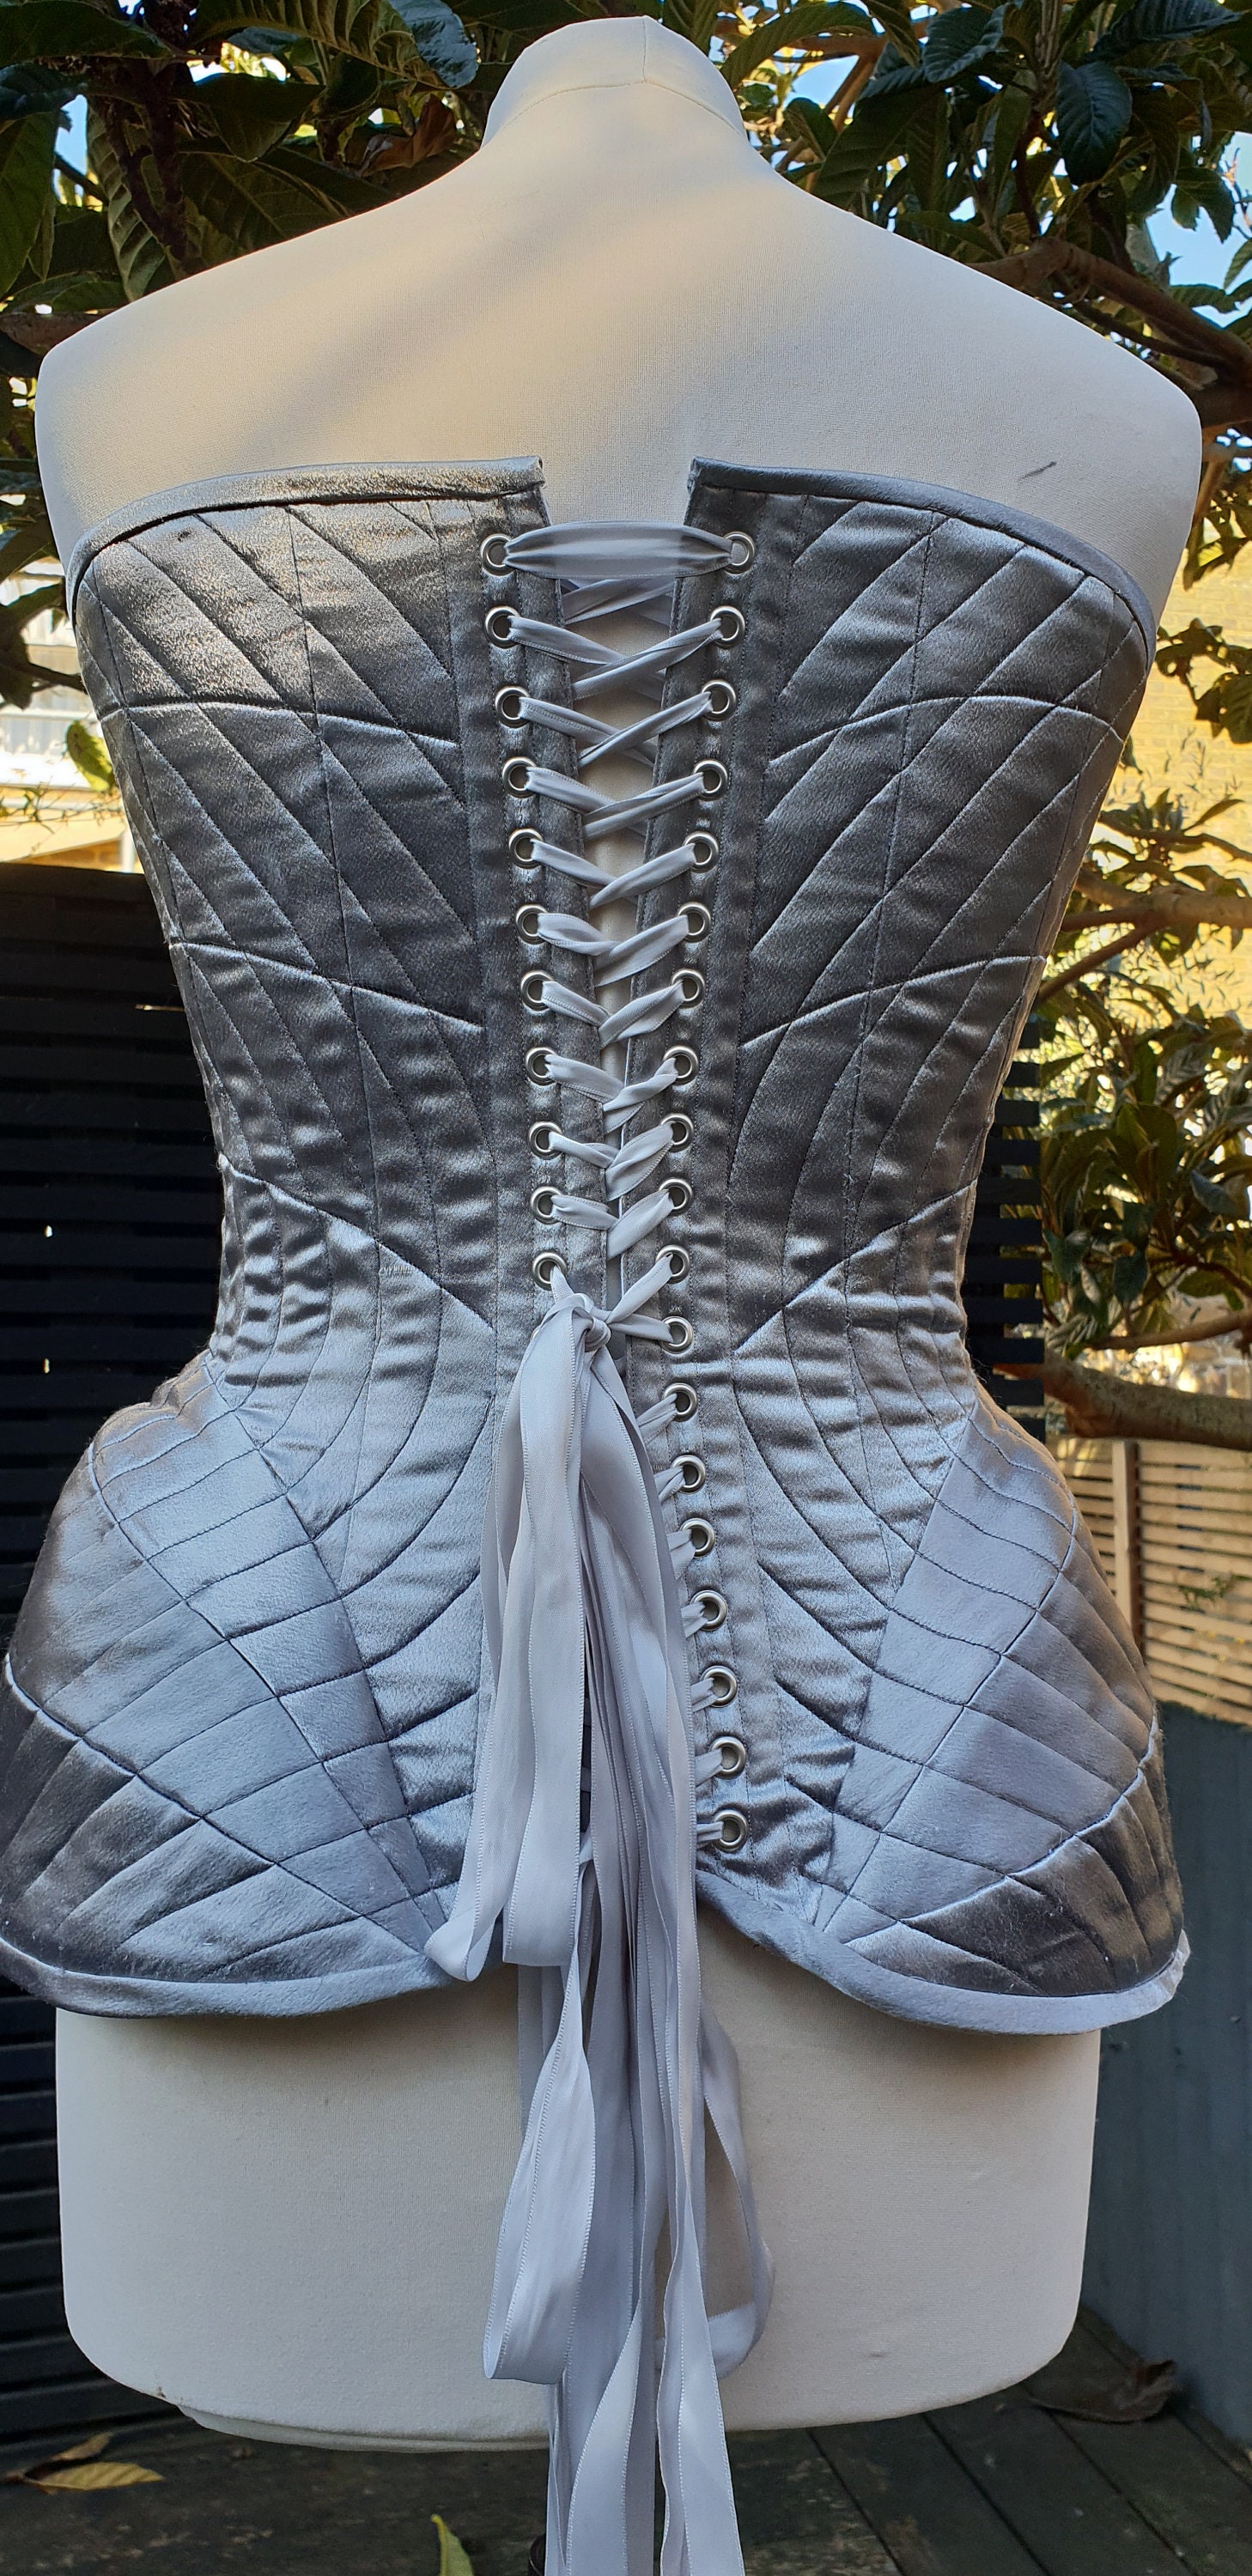 E BOOK 200 Years of Corset Design Reimagined a Collection of 10